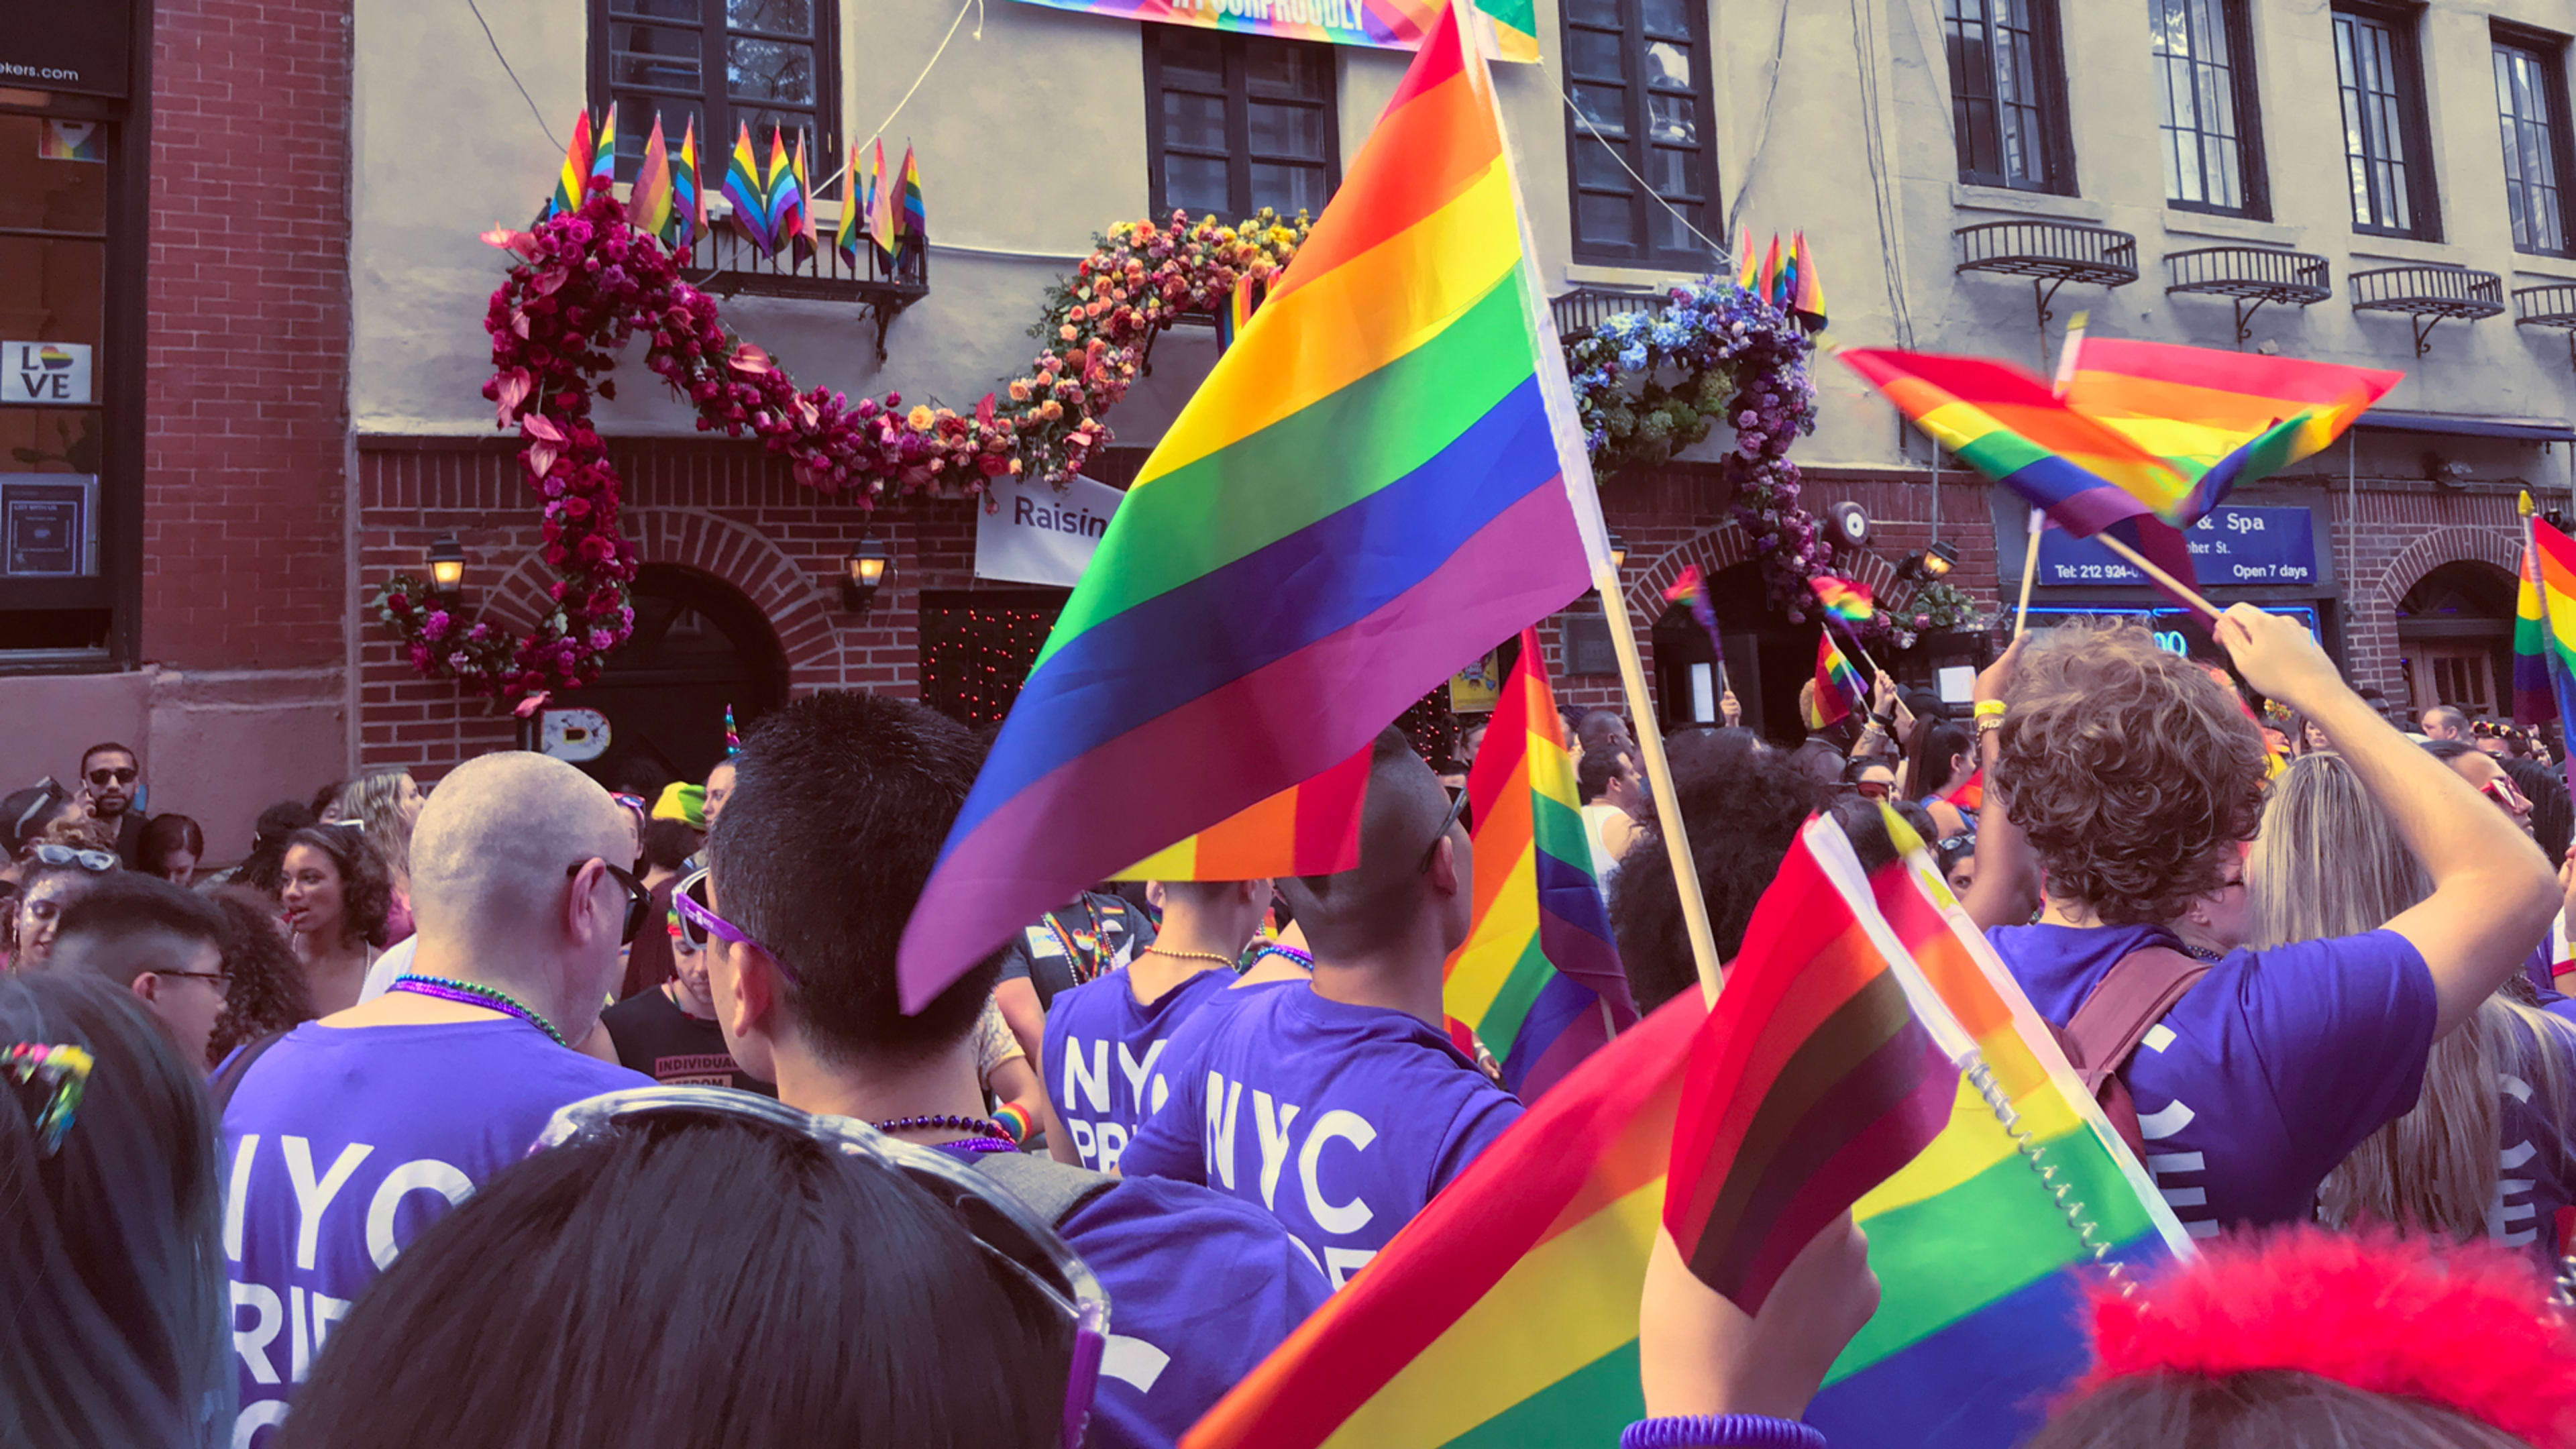 NYC Pride parade live stream: How to watch the march to Stonewall online